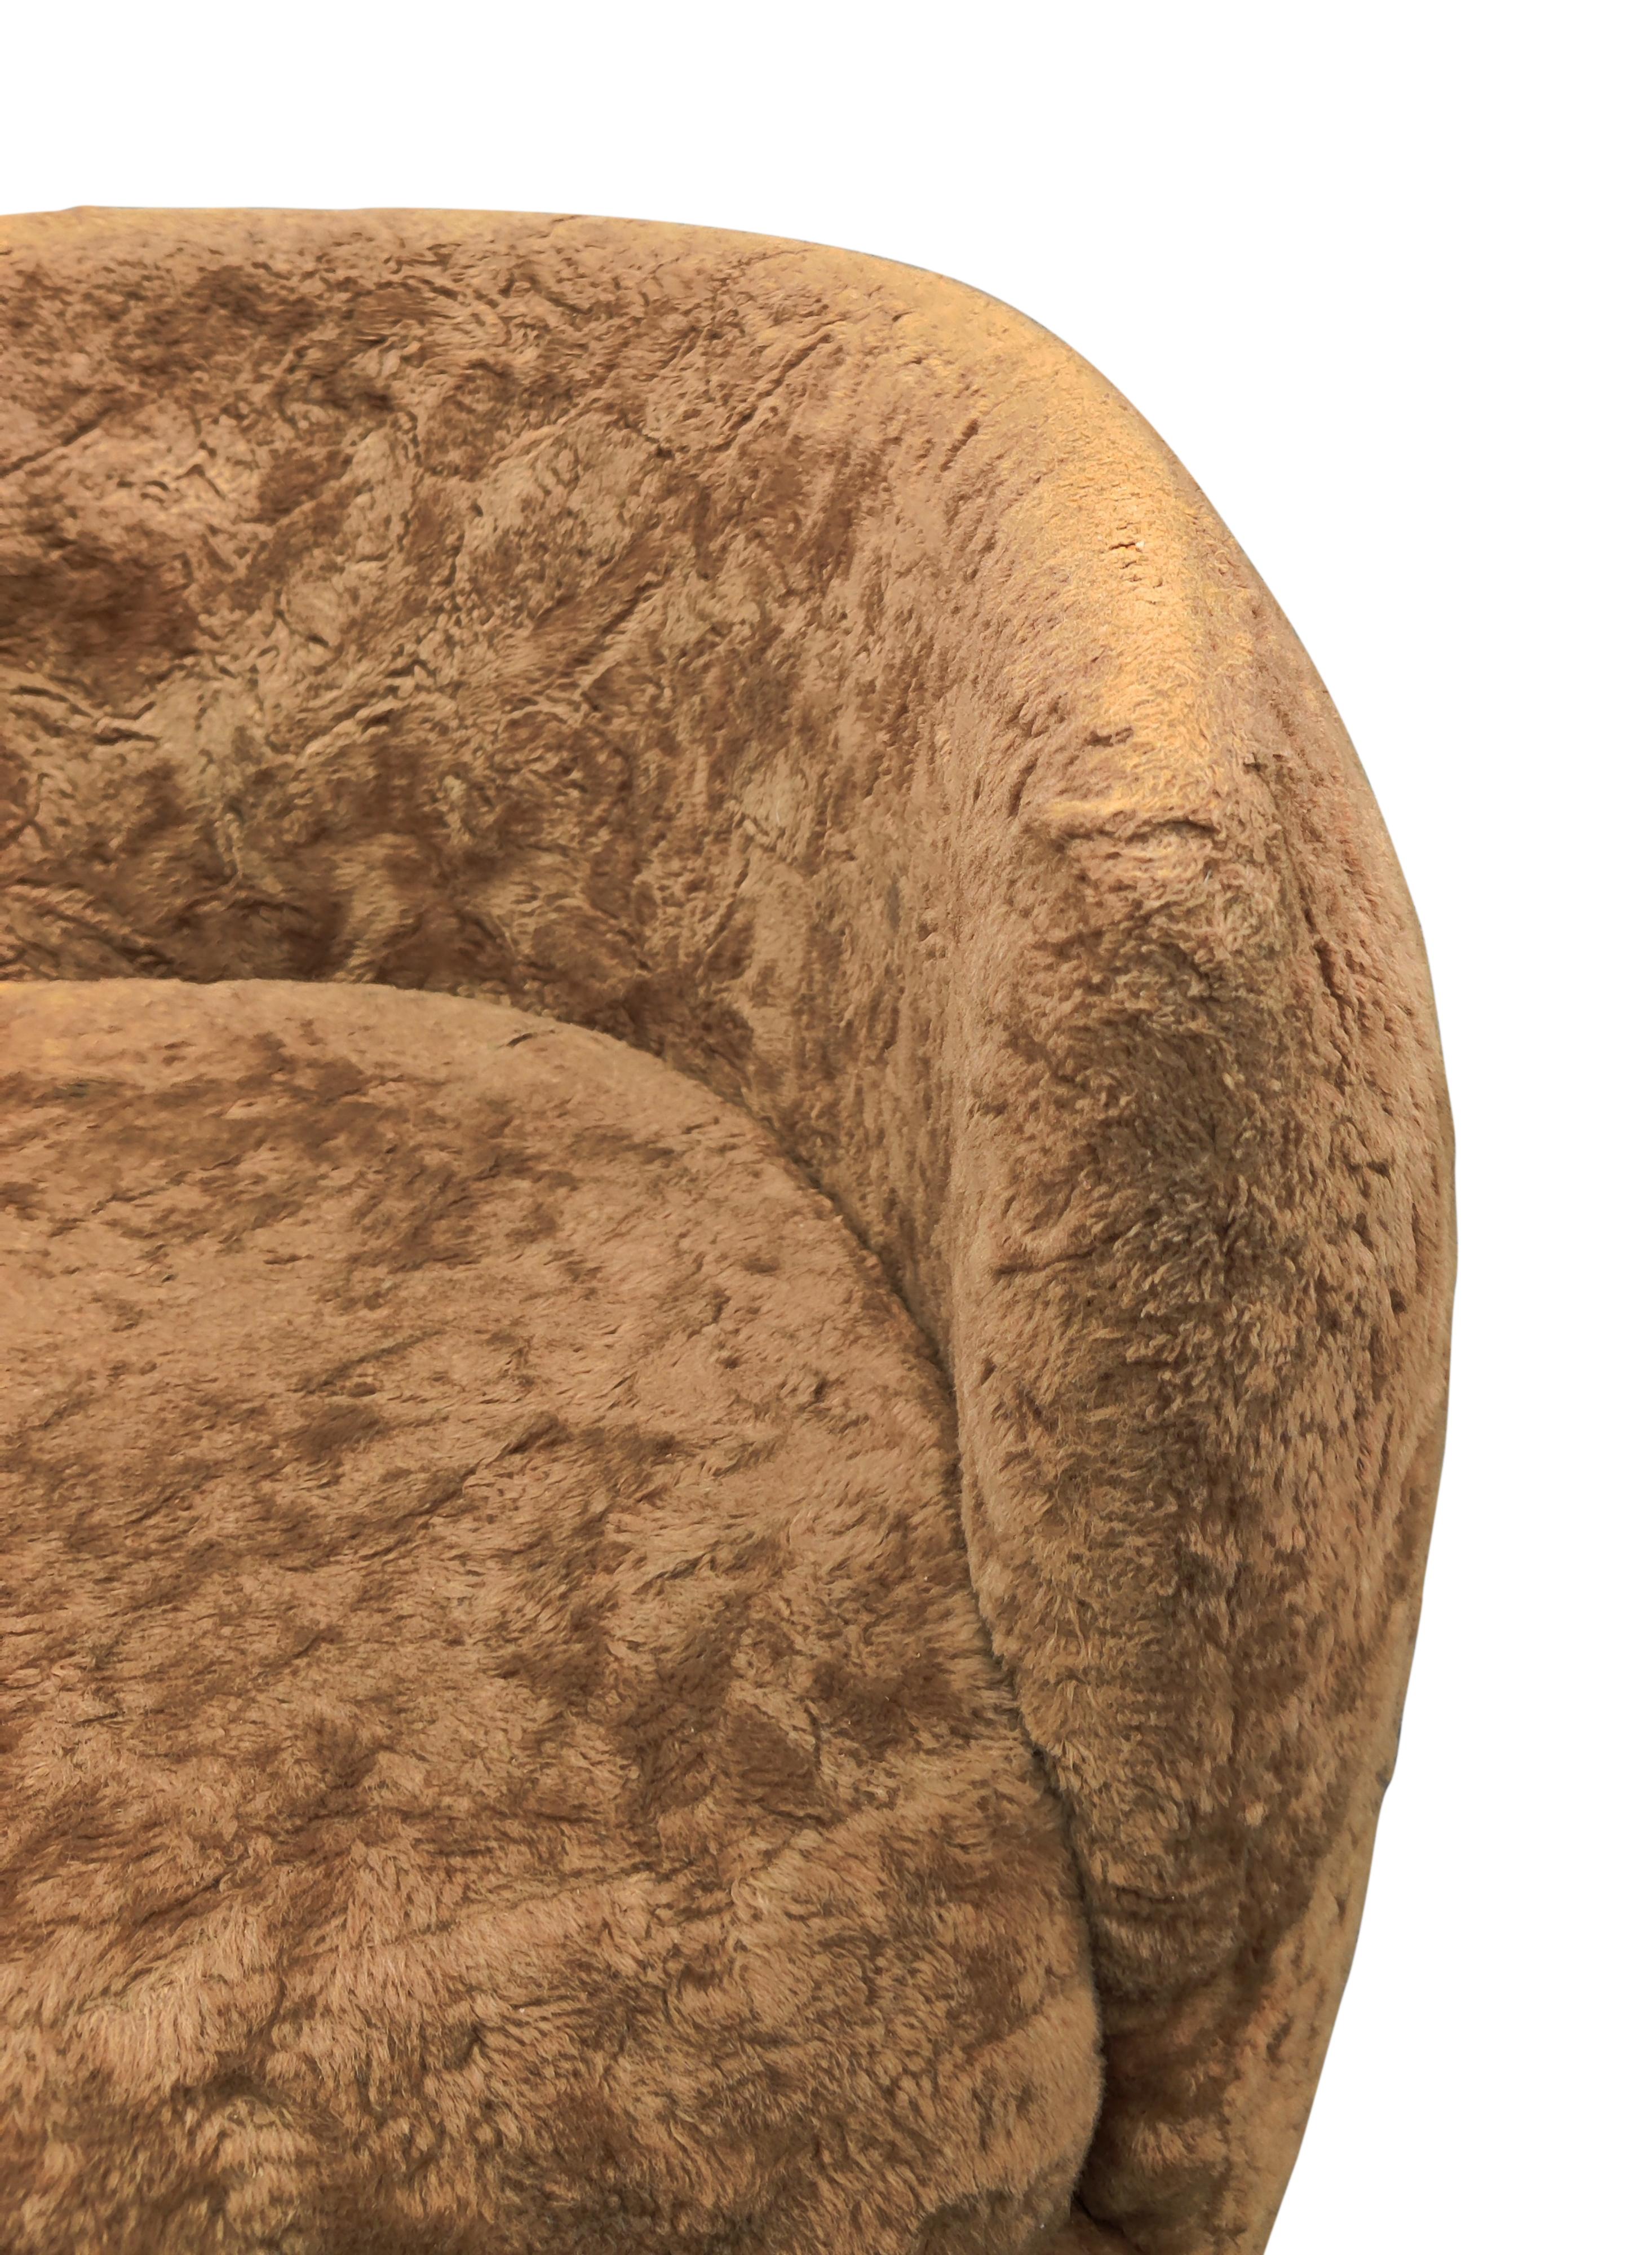 Pair Adrian Pearsall Barrel Form Swivel Chairs Brown Fur Upholstry Tulip Bases For Sale 1